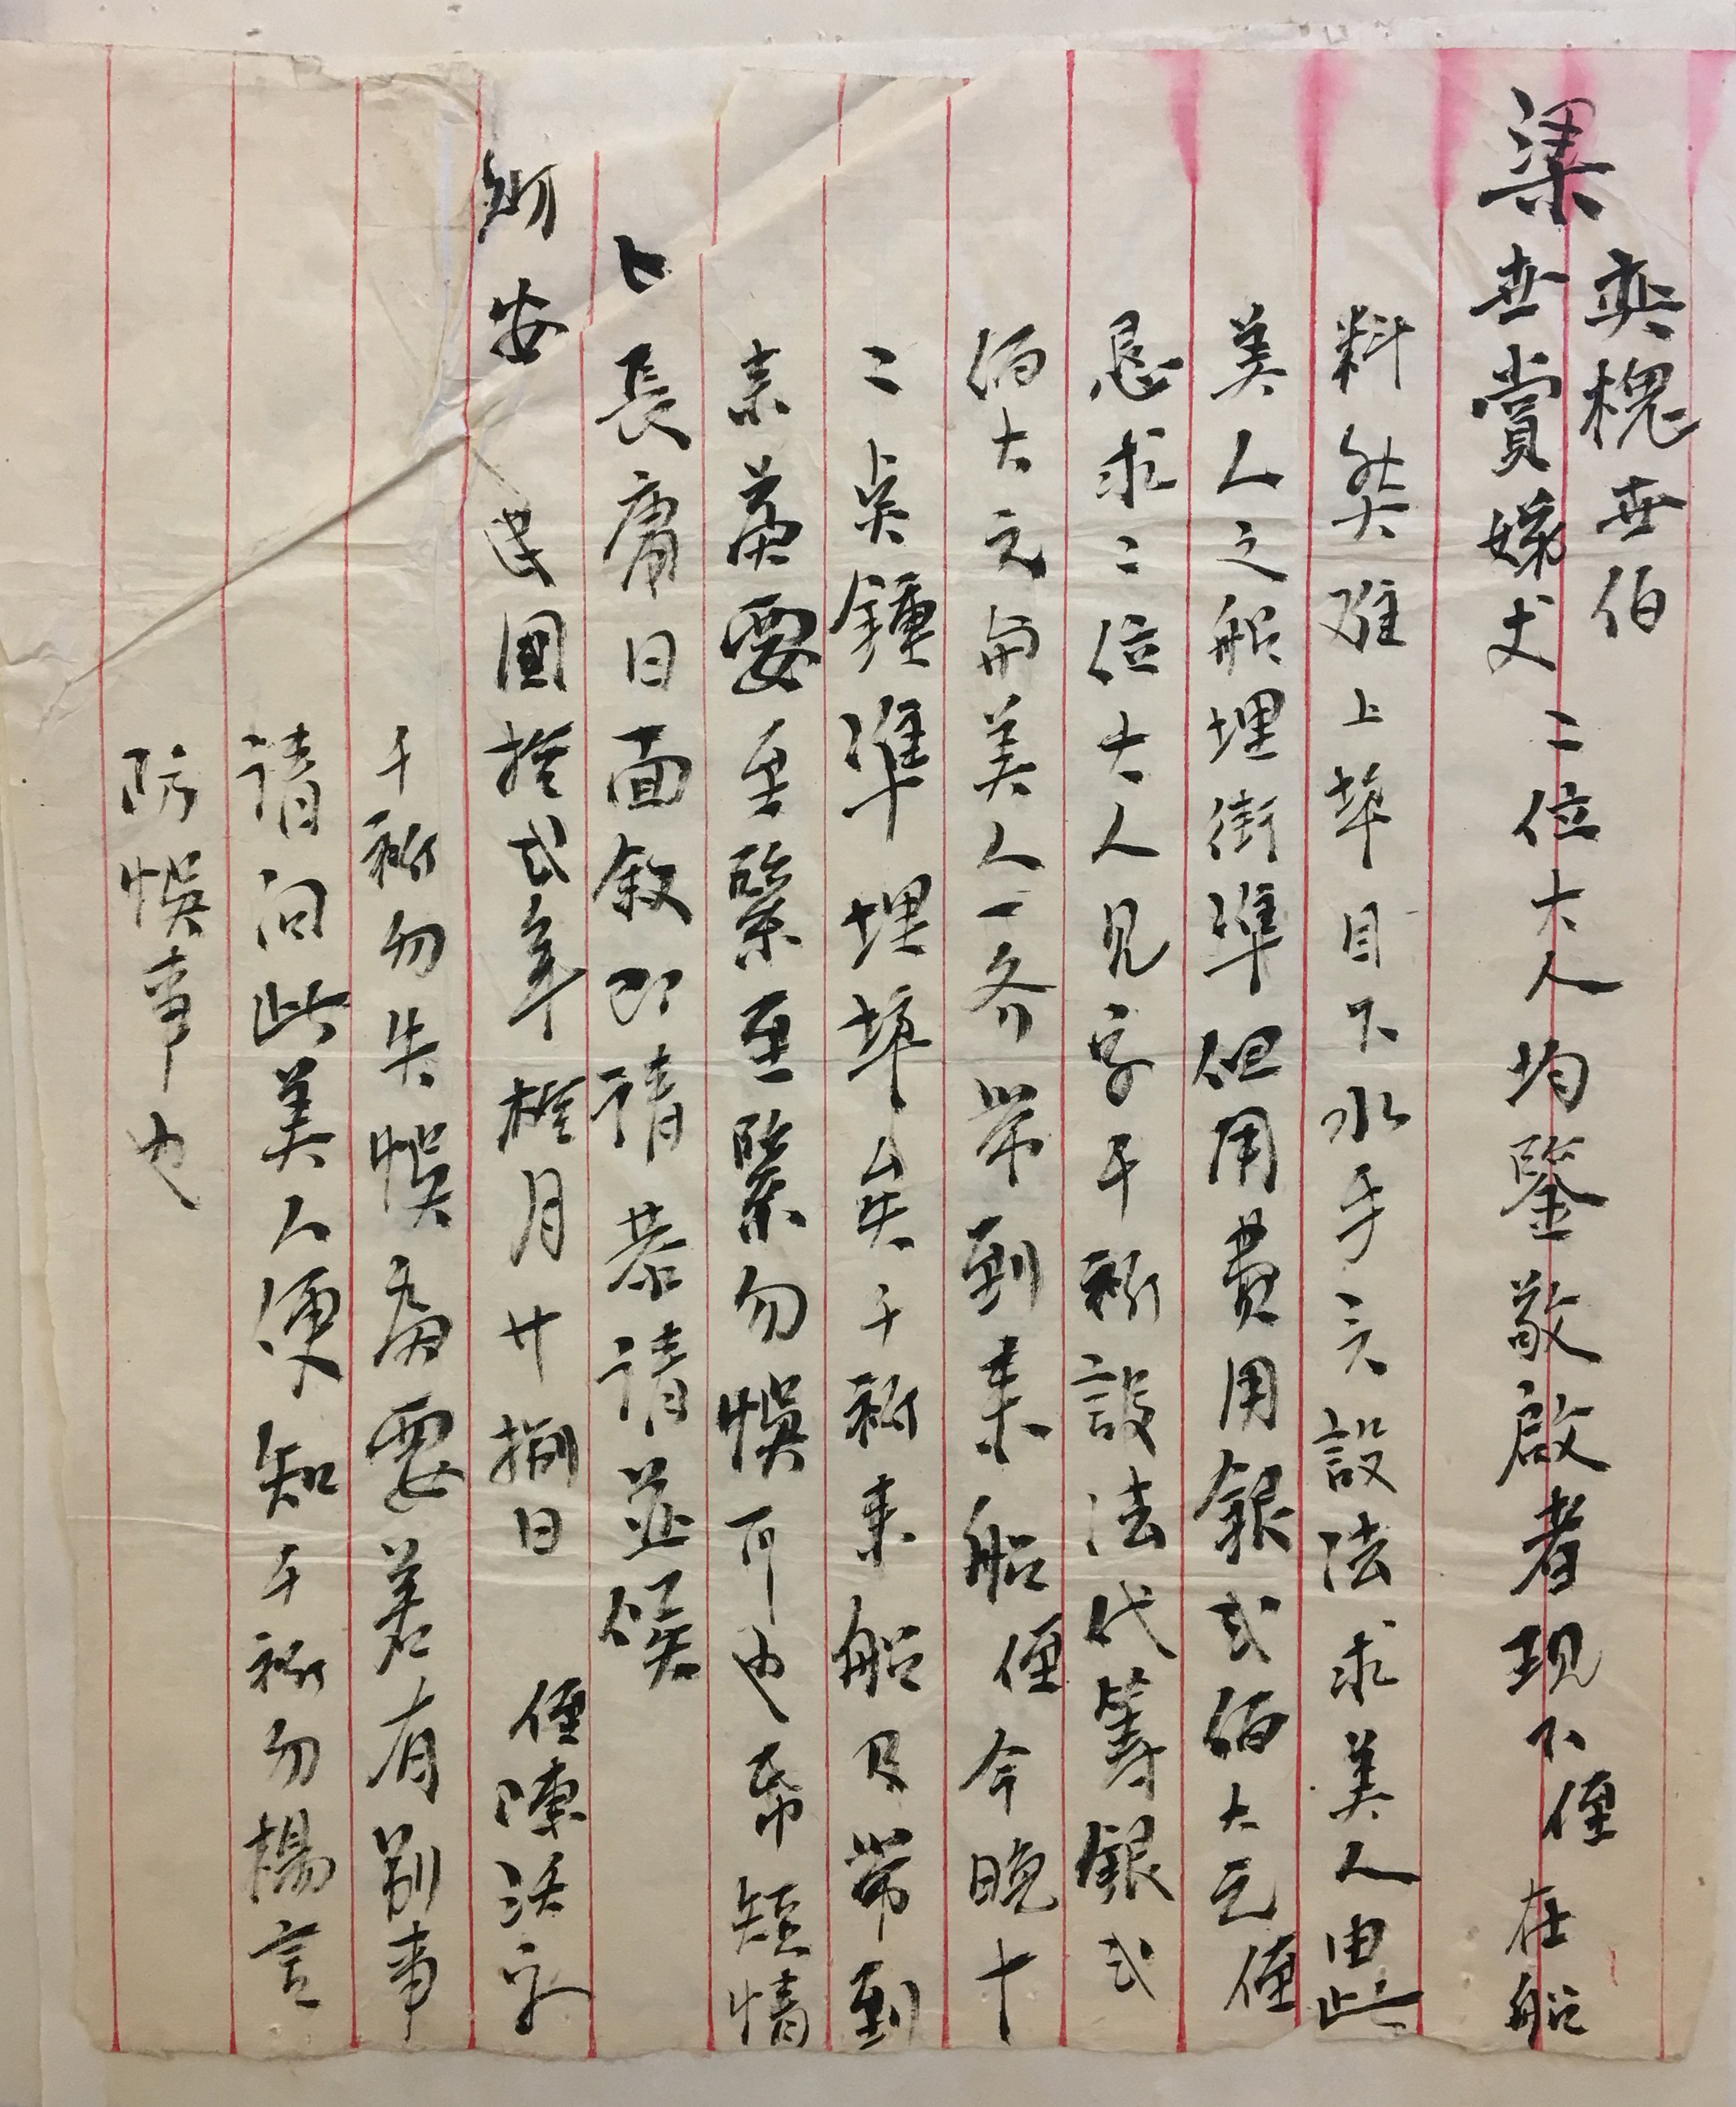 Translated letter from Chin Yook, January 1924.